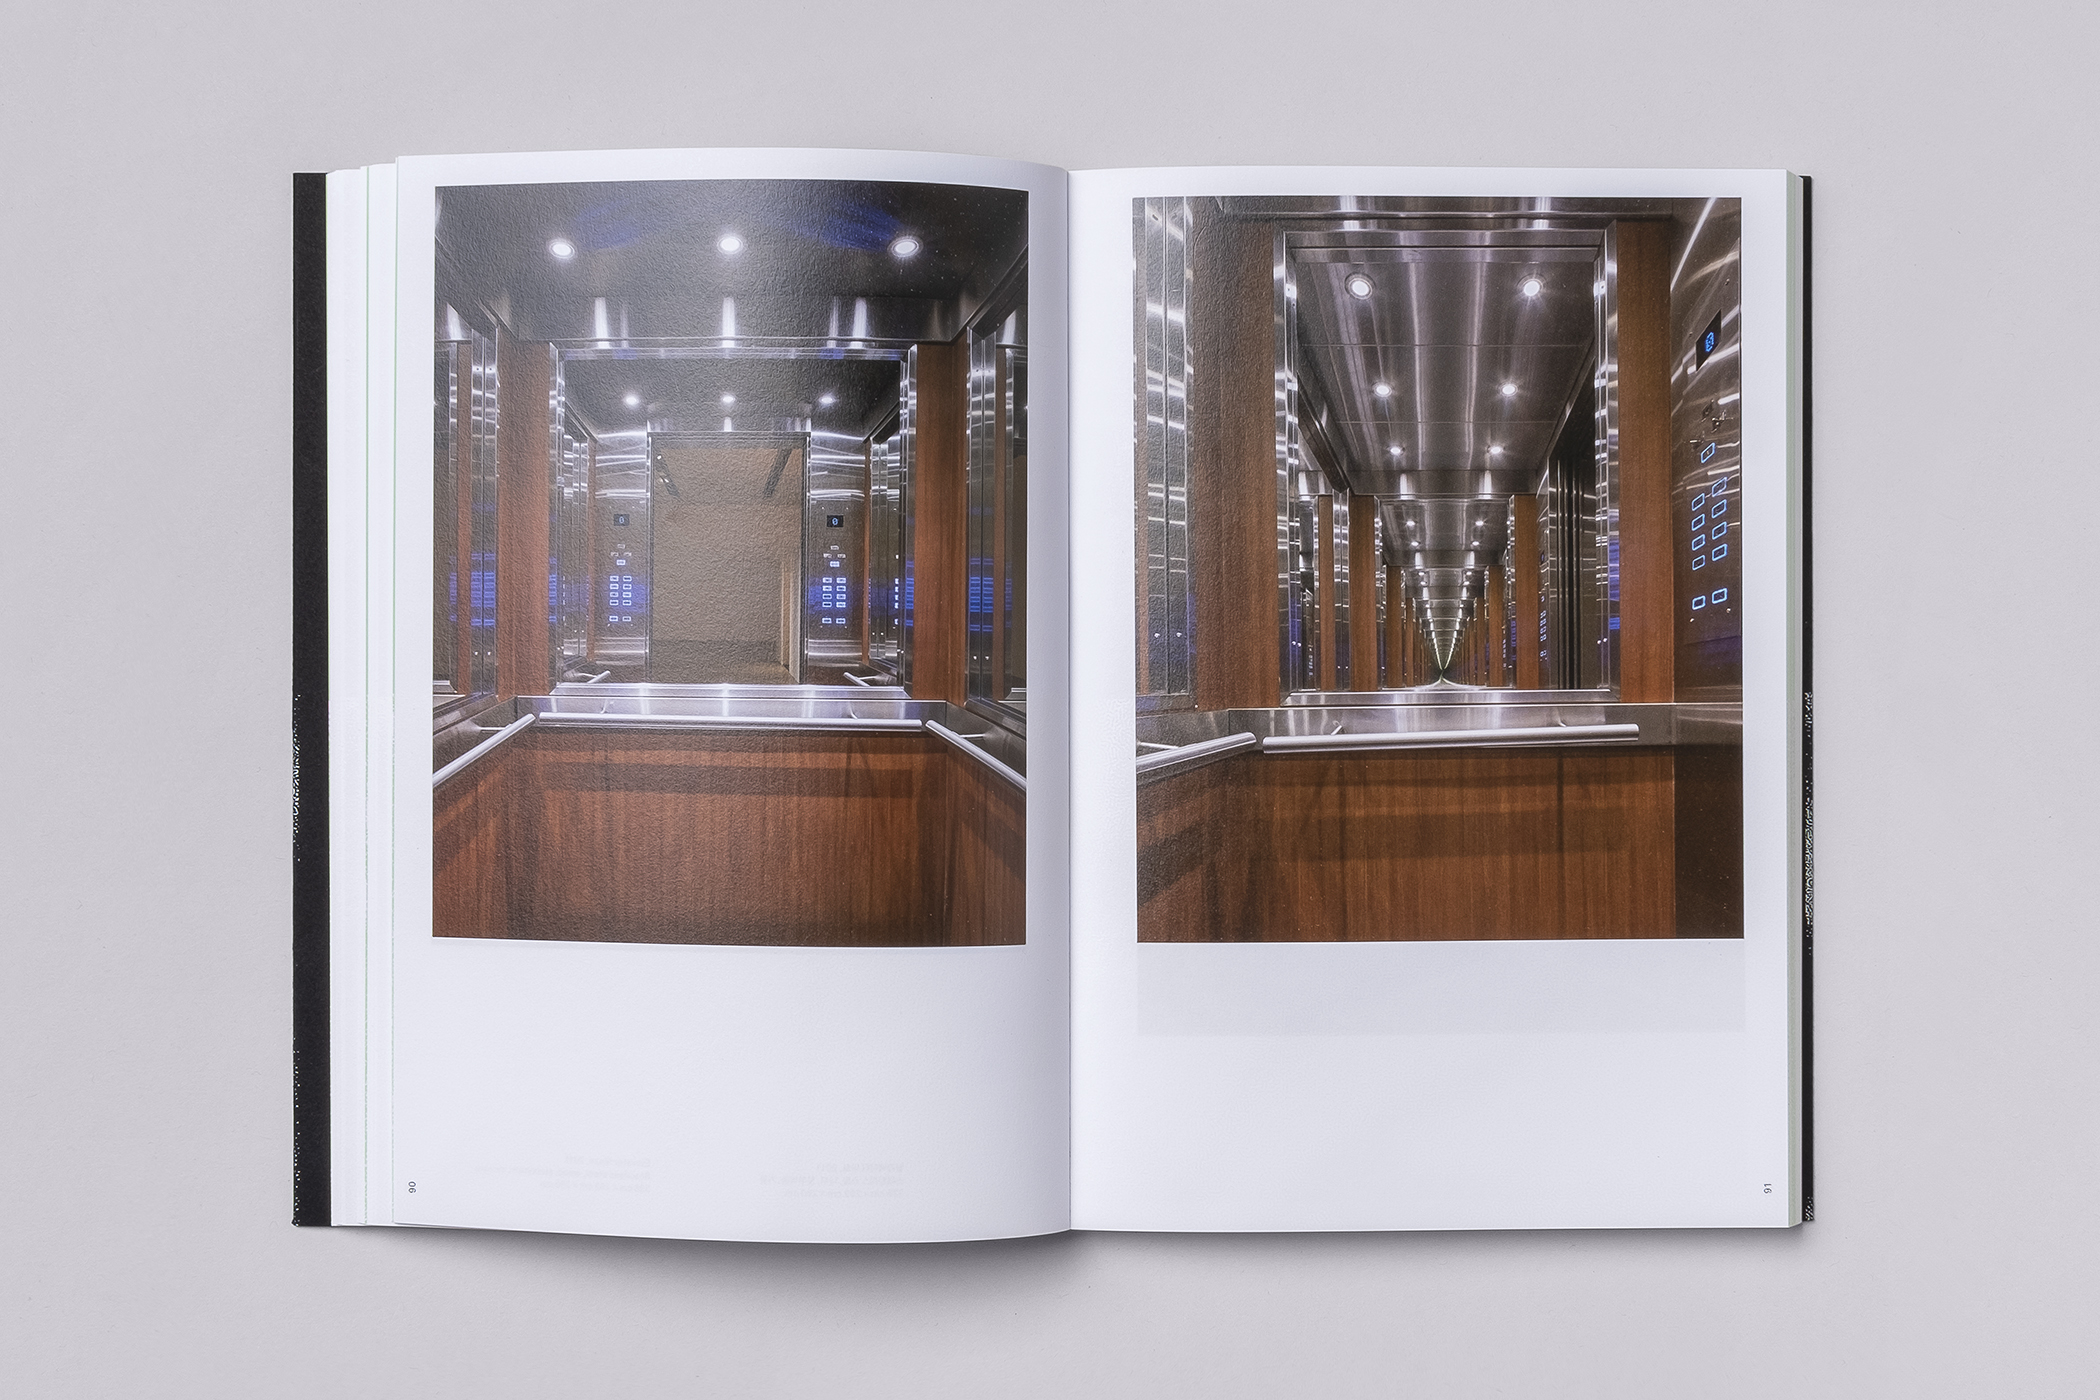 A look at the catalogue for the exhibition Leandro Erlich: Both Sides Now, designed by Studio fnt.